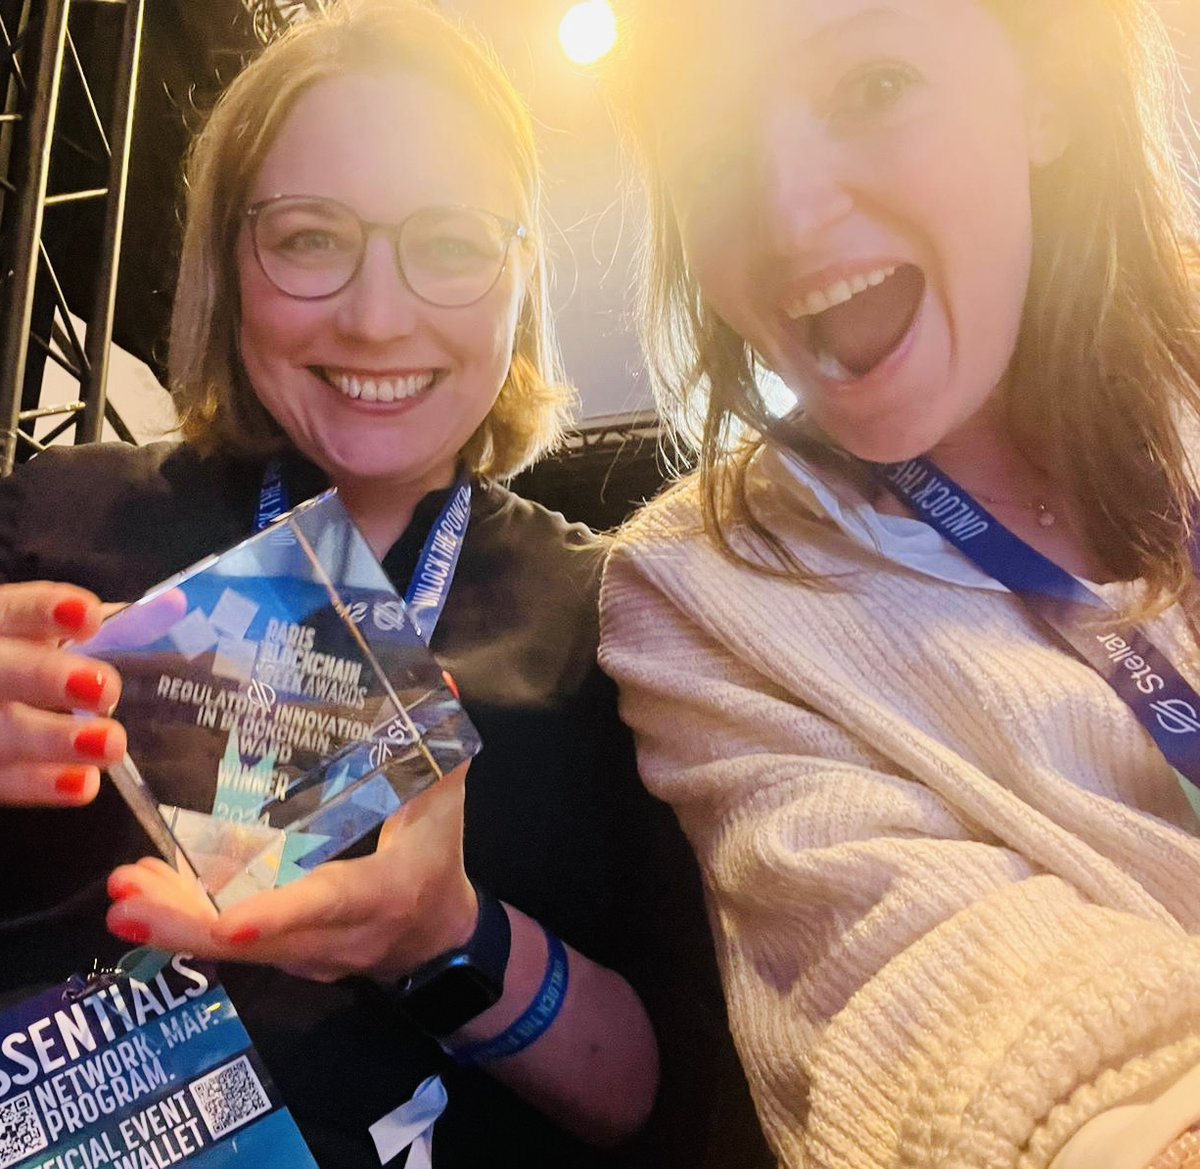 Gm frens, We're super excited to share that Tokenize.it won the award for BEST REGULATORY INNOVATION IN BLOCKCHAIN at @ParisBlockWeek !🥳